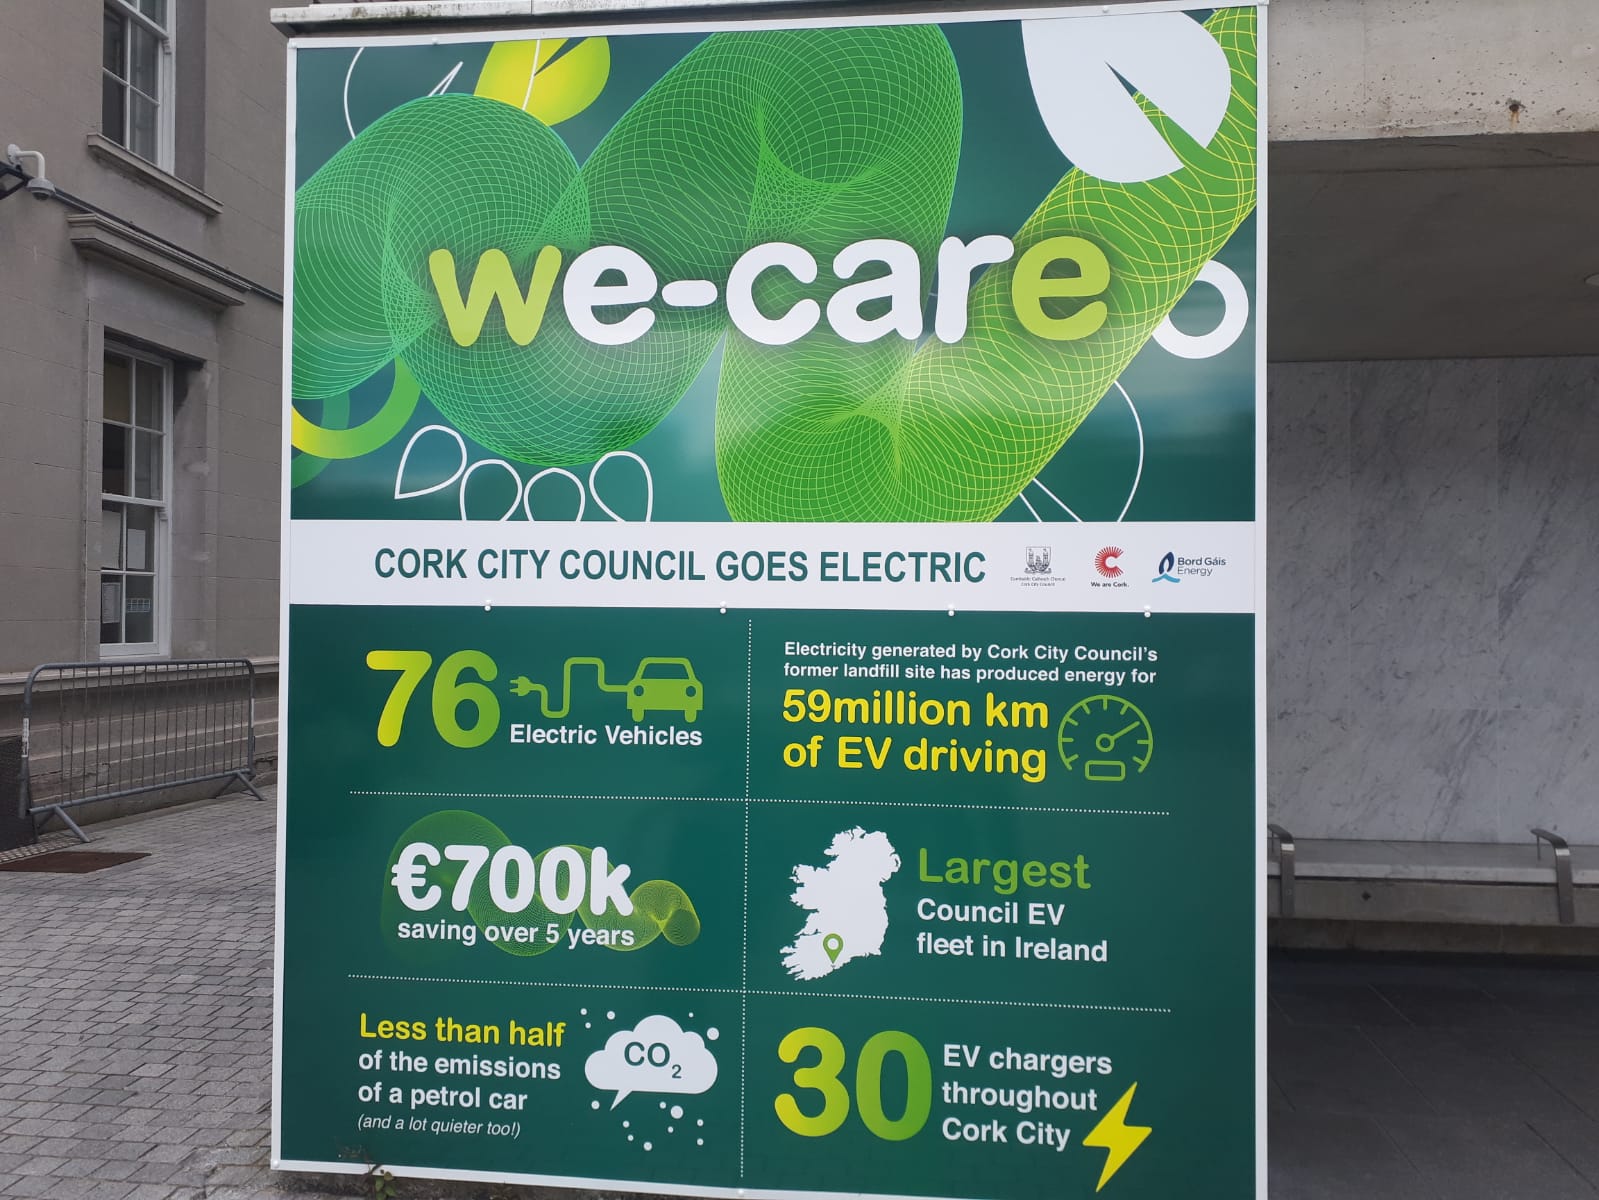 Billboard boasts the benefits of going electric